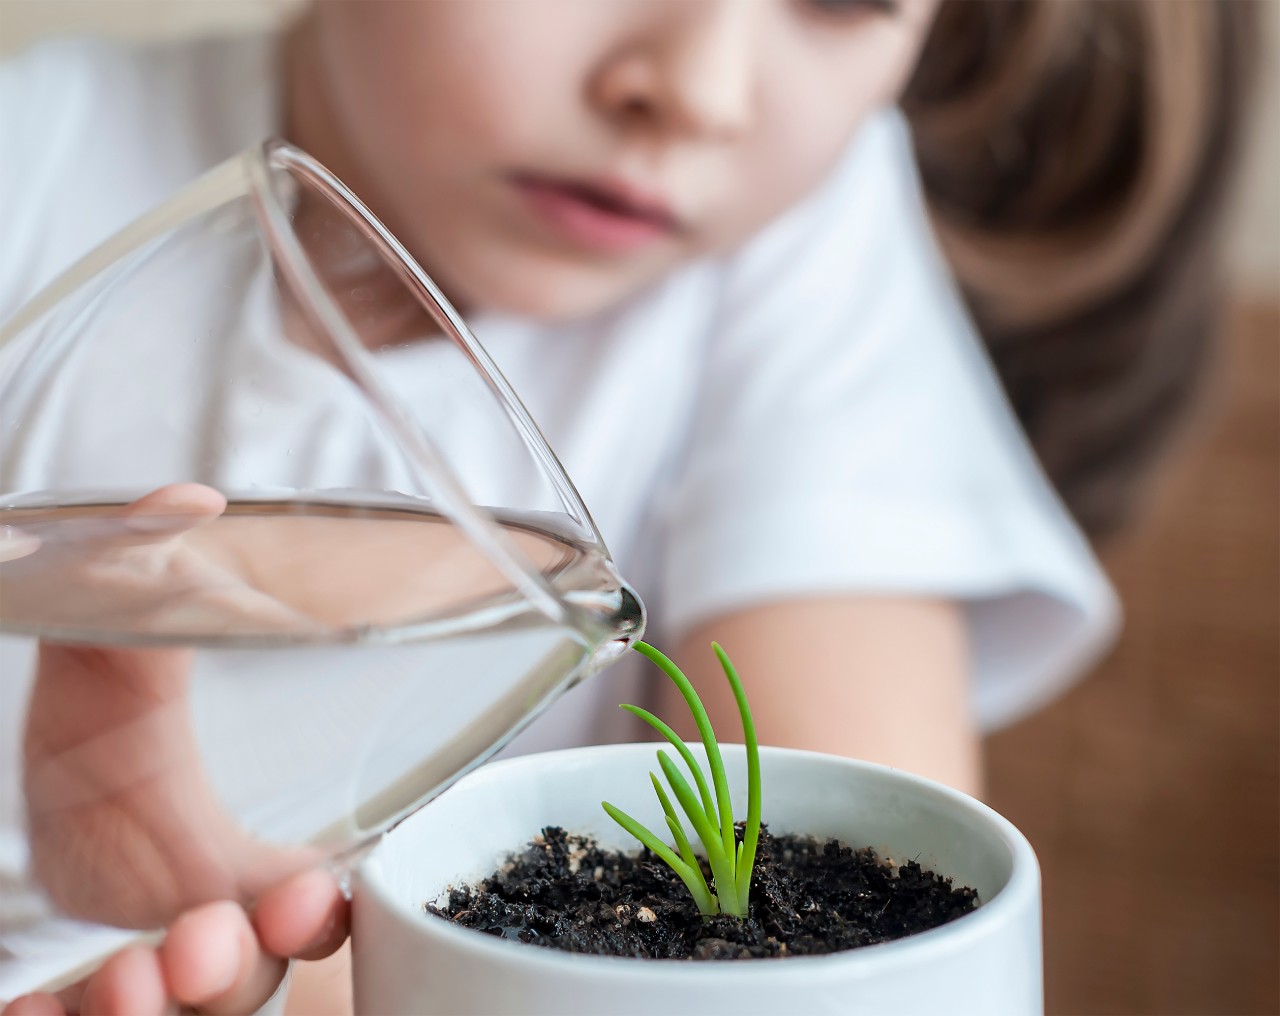 Little toddler girl is holding a transparent glass with water and watering young plant. Caring for a new life. The child's hands. Selective focus. Earth day holiday concept. World Environment Day; Shutterstock ID 1050869177; purchase_order: PWS web; job: 